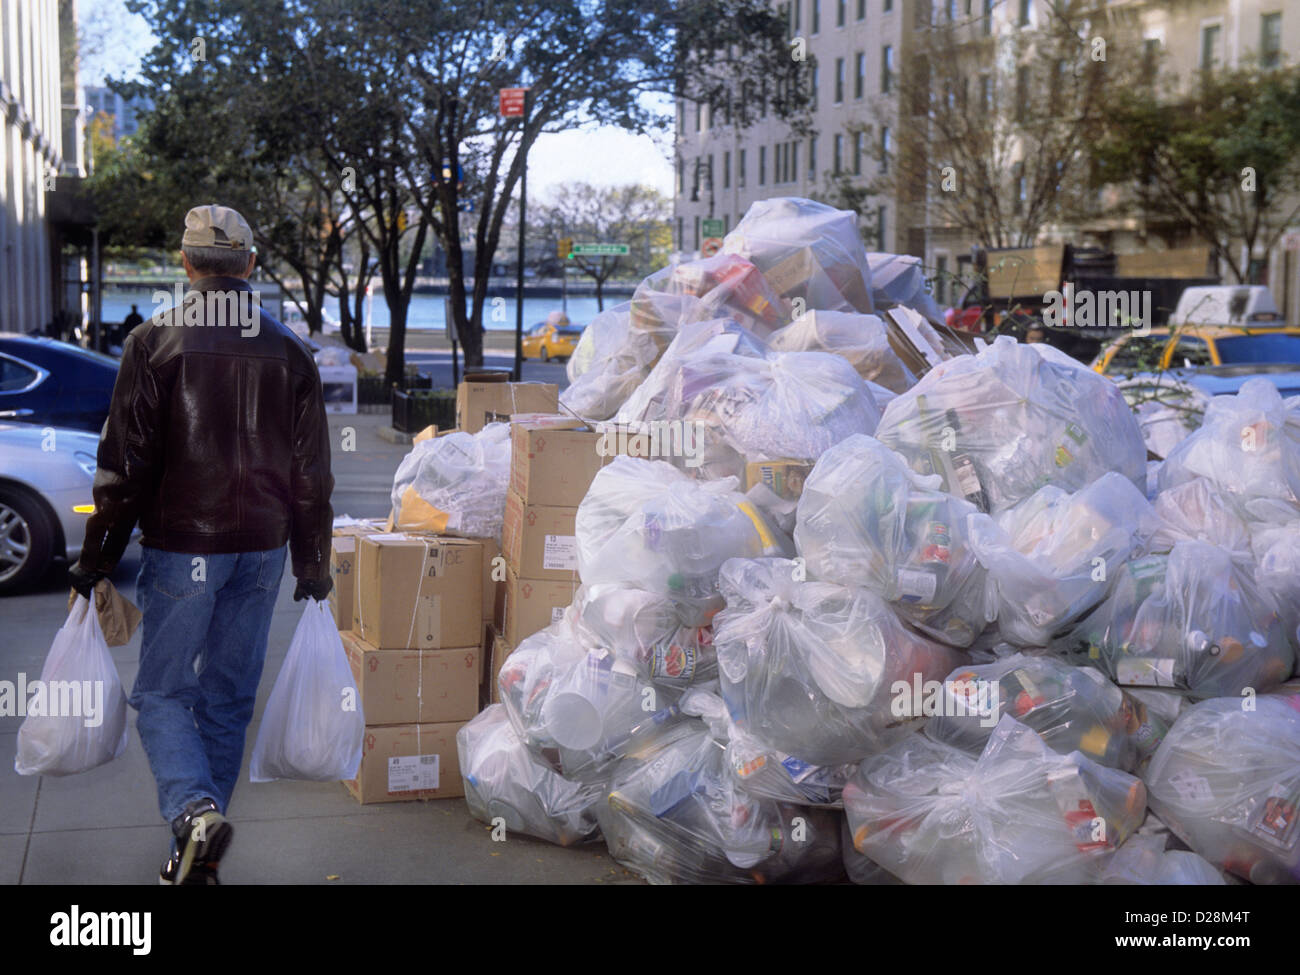 https://c8.alamy.com/comp/D28M4T/man-carrying-shopping-bags-passing-piles-of-plastic-garbage-bags-at-D28M4T.jpg